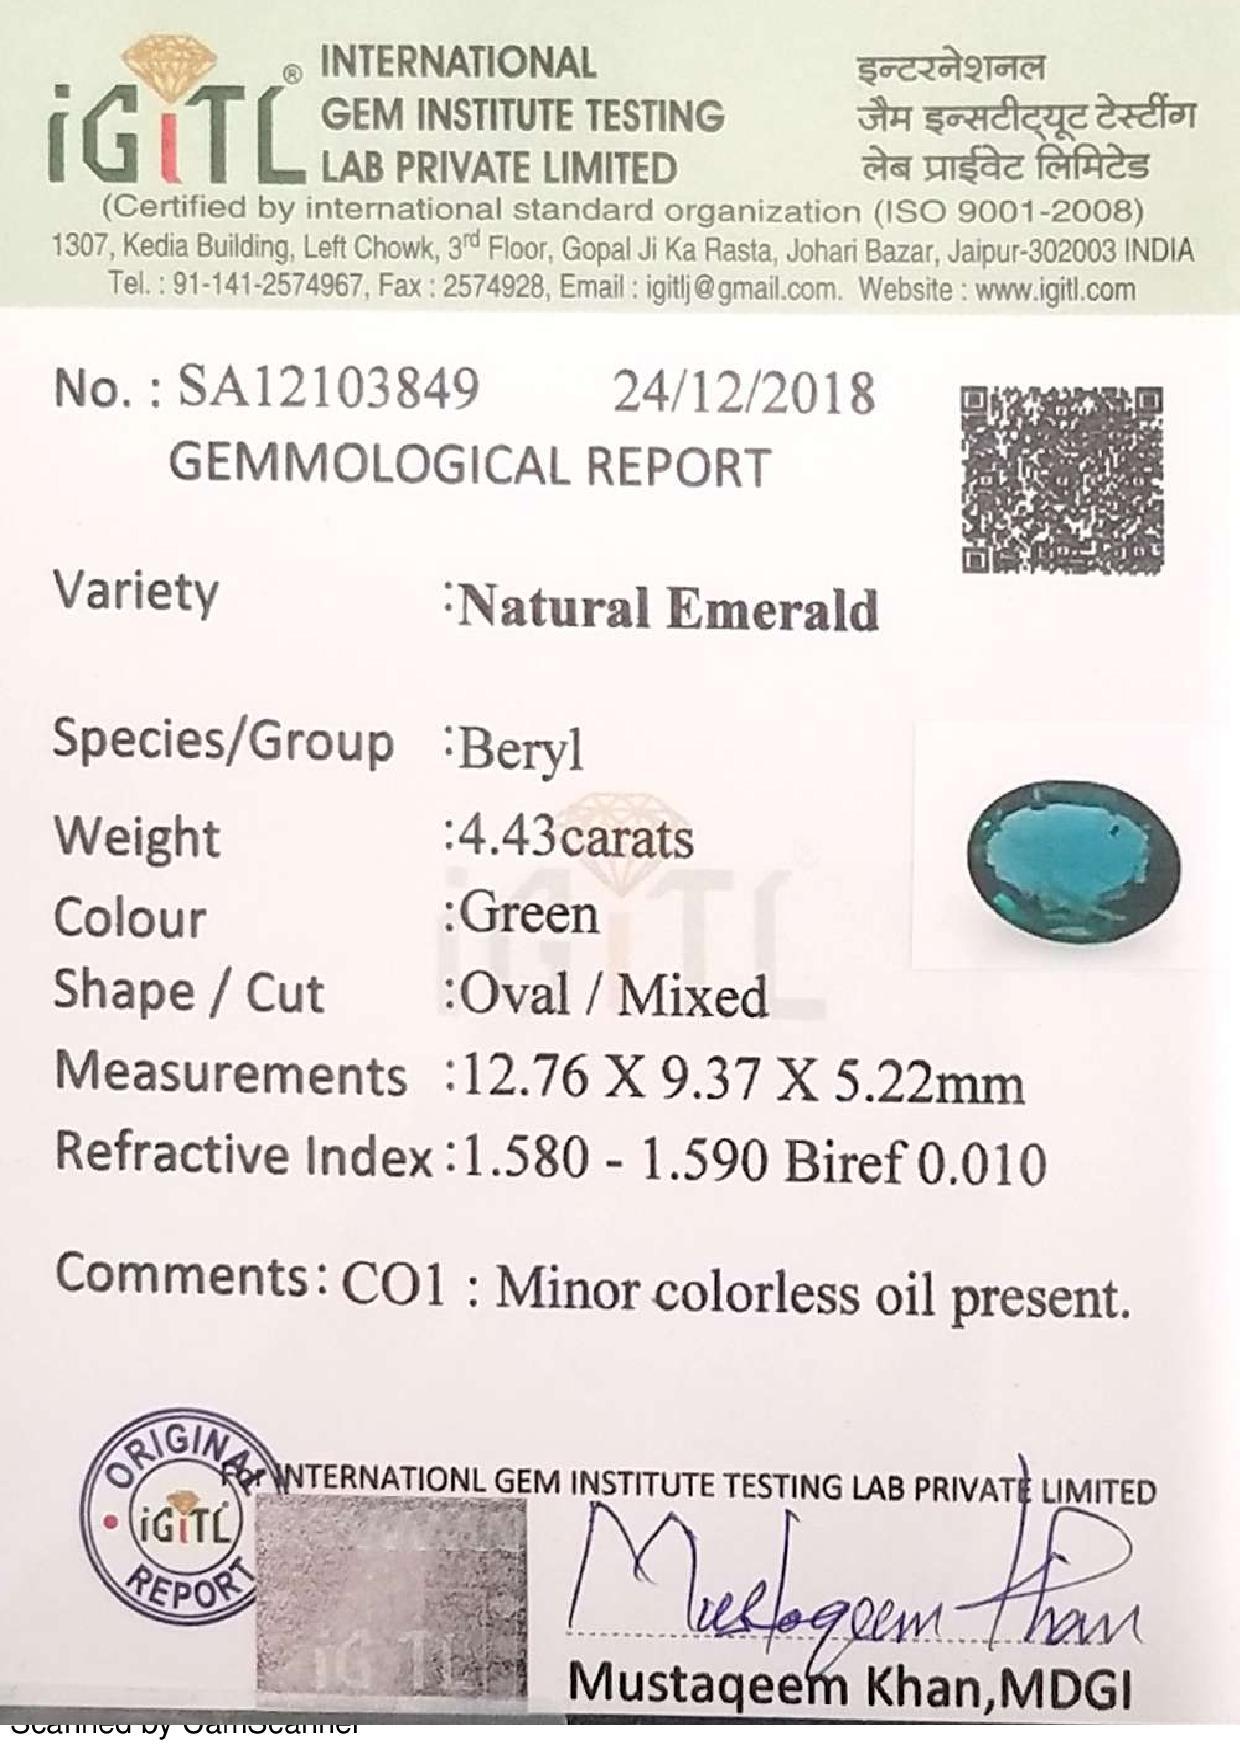 Oval Cut 4.43 Ct Weight Oval Shaped Green Color IGITL Certified Emerald Gemstone Pendant For Sale